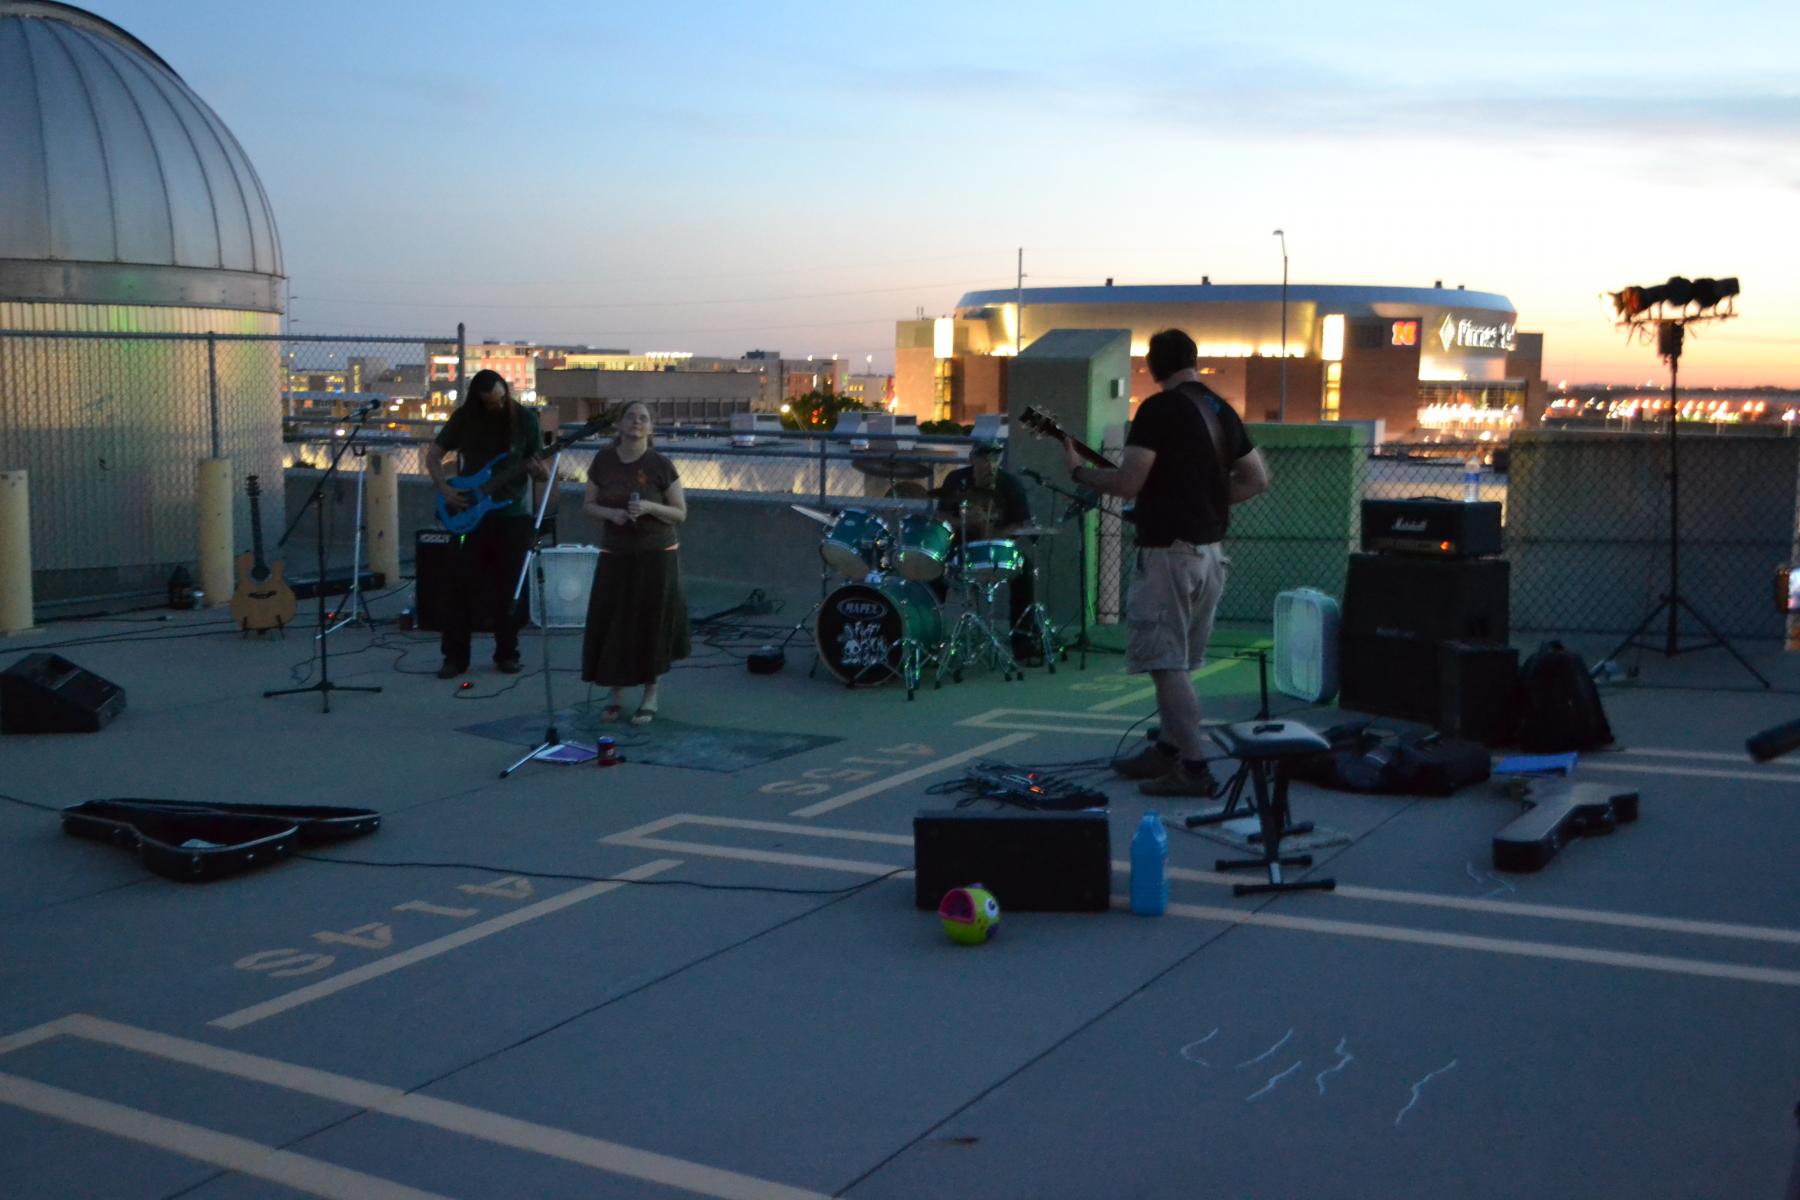 Bandmembers perform next to the Student Observatory.